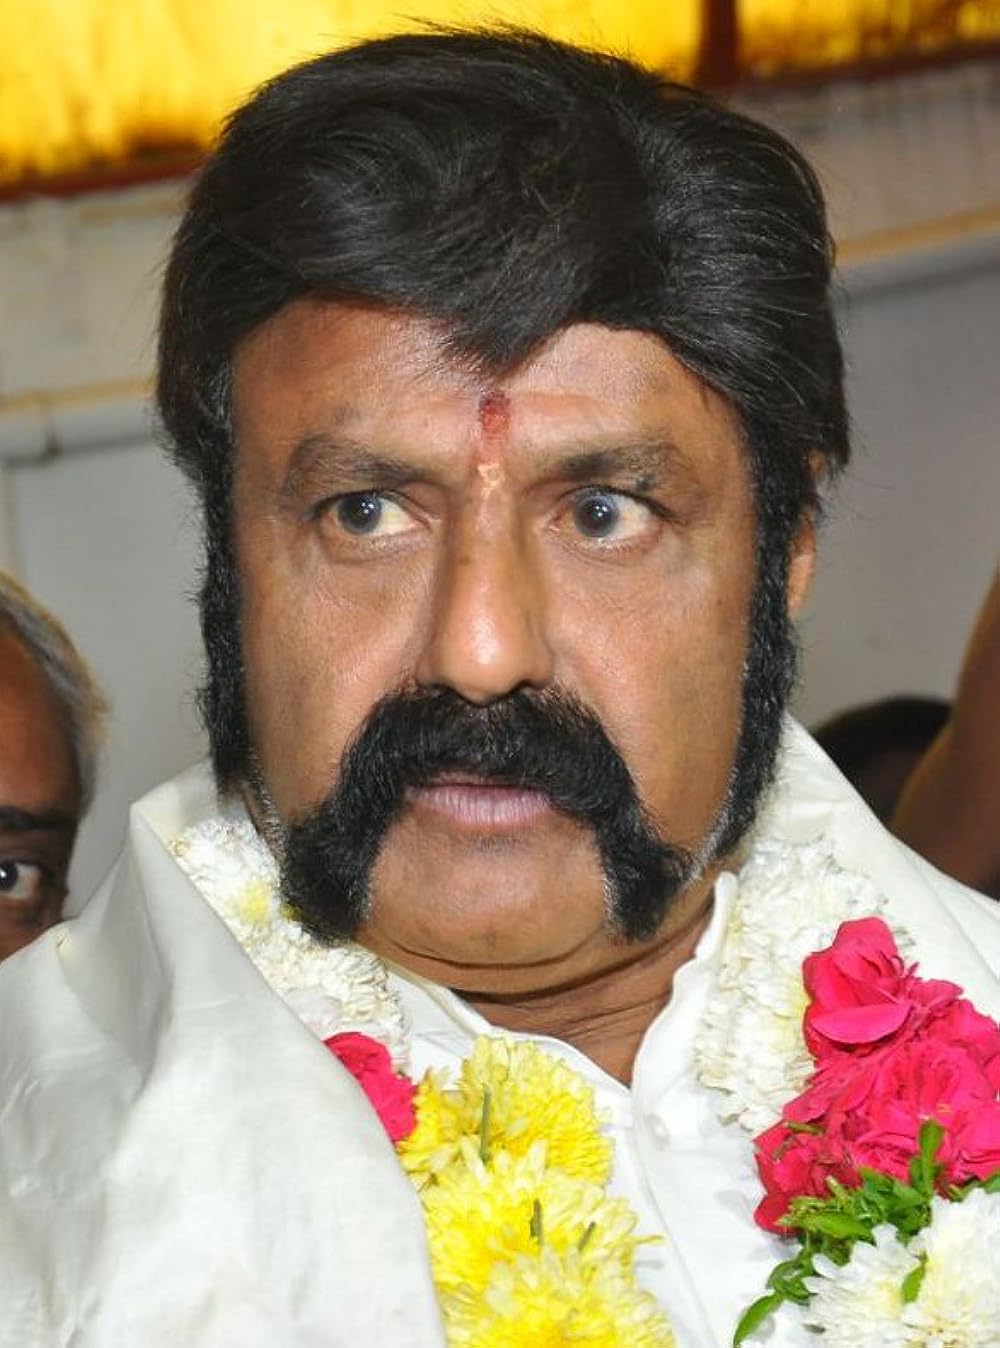 Nandamuri Balakrishna and Nayanthara played the lead roles of Lord Ram and Sita in the 2011 film 'Sri Rama Rajyam.' The film received numerous state awards for its compelling narrative and outstanding performances.